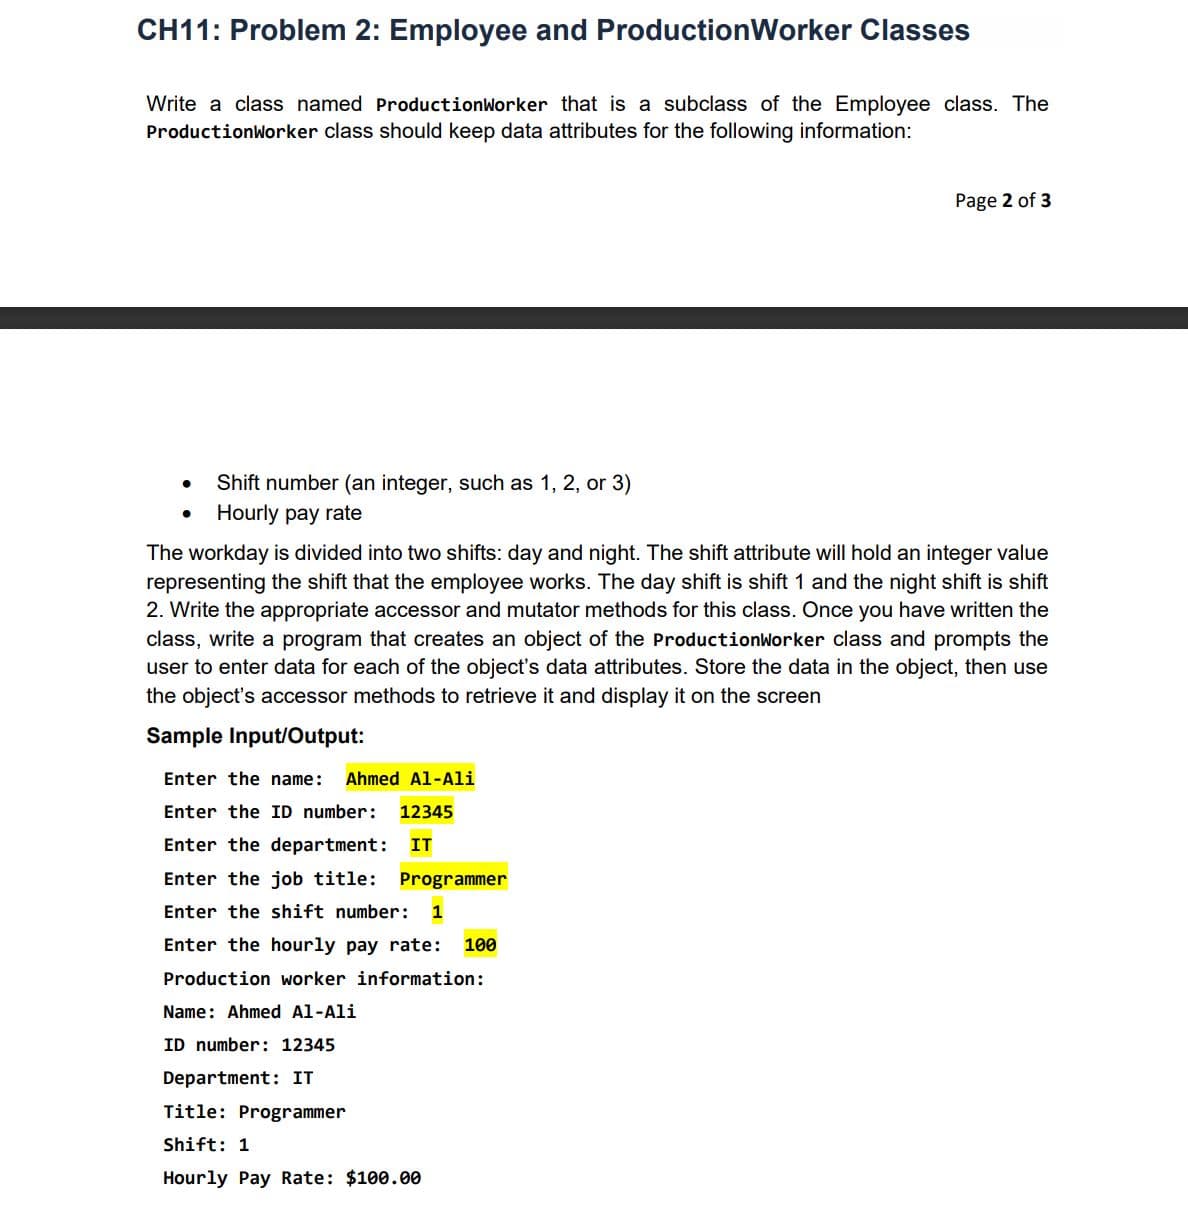 CH11: Problem 2: Employee and ProductionWorker Classes
Write a class named ProductionWorker that is a subclass of the Employee class. The
ProductionWorker class should keep data attributes for the following information:
Page 2 of 3
Shift number (an integer, such as 1, 2, or 3)
Hourly pay rate
The workday is divided into two shifts: day and night. The shift attribute will hold an integer value
representing the shift that the employee works. The day shift is shift 1 and the night shift is shift
2. Write the appropriate accessor and mutator methods for this class. Once you have written the
class, write a program that creates an object of the ProductionWorker class and prompts the
user to enter data for each of the object's data attributes. Store the data in the object, then use
the object's accessor methods to retrieve it and display it on the screen
Sample Input/Output:
Enter the name:
Ahmed Al-Ali
Enter the ID number:
12345
Enter the department:
IT
Enter the job title: Programmer
Enter the shift number:
1
Enter the hourly pay rate:
100
Production worker information:
Name: Ahmed Al-Ali
ID number: 12345
Department: IT
Title: Programmer
Shift: 1
Hourly Pay Rate: $100.00
